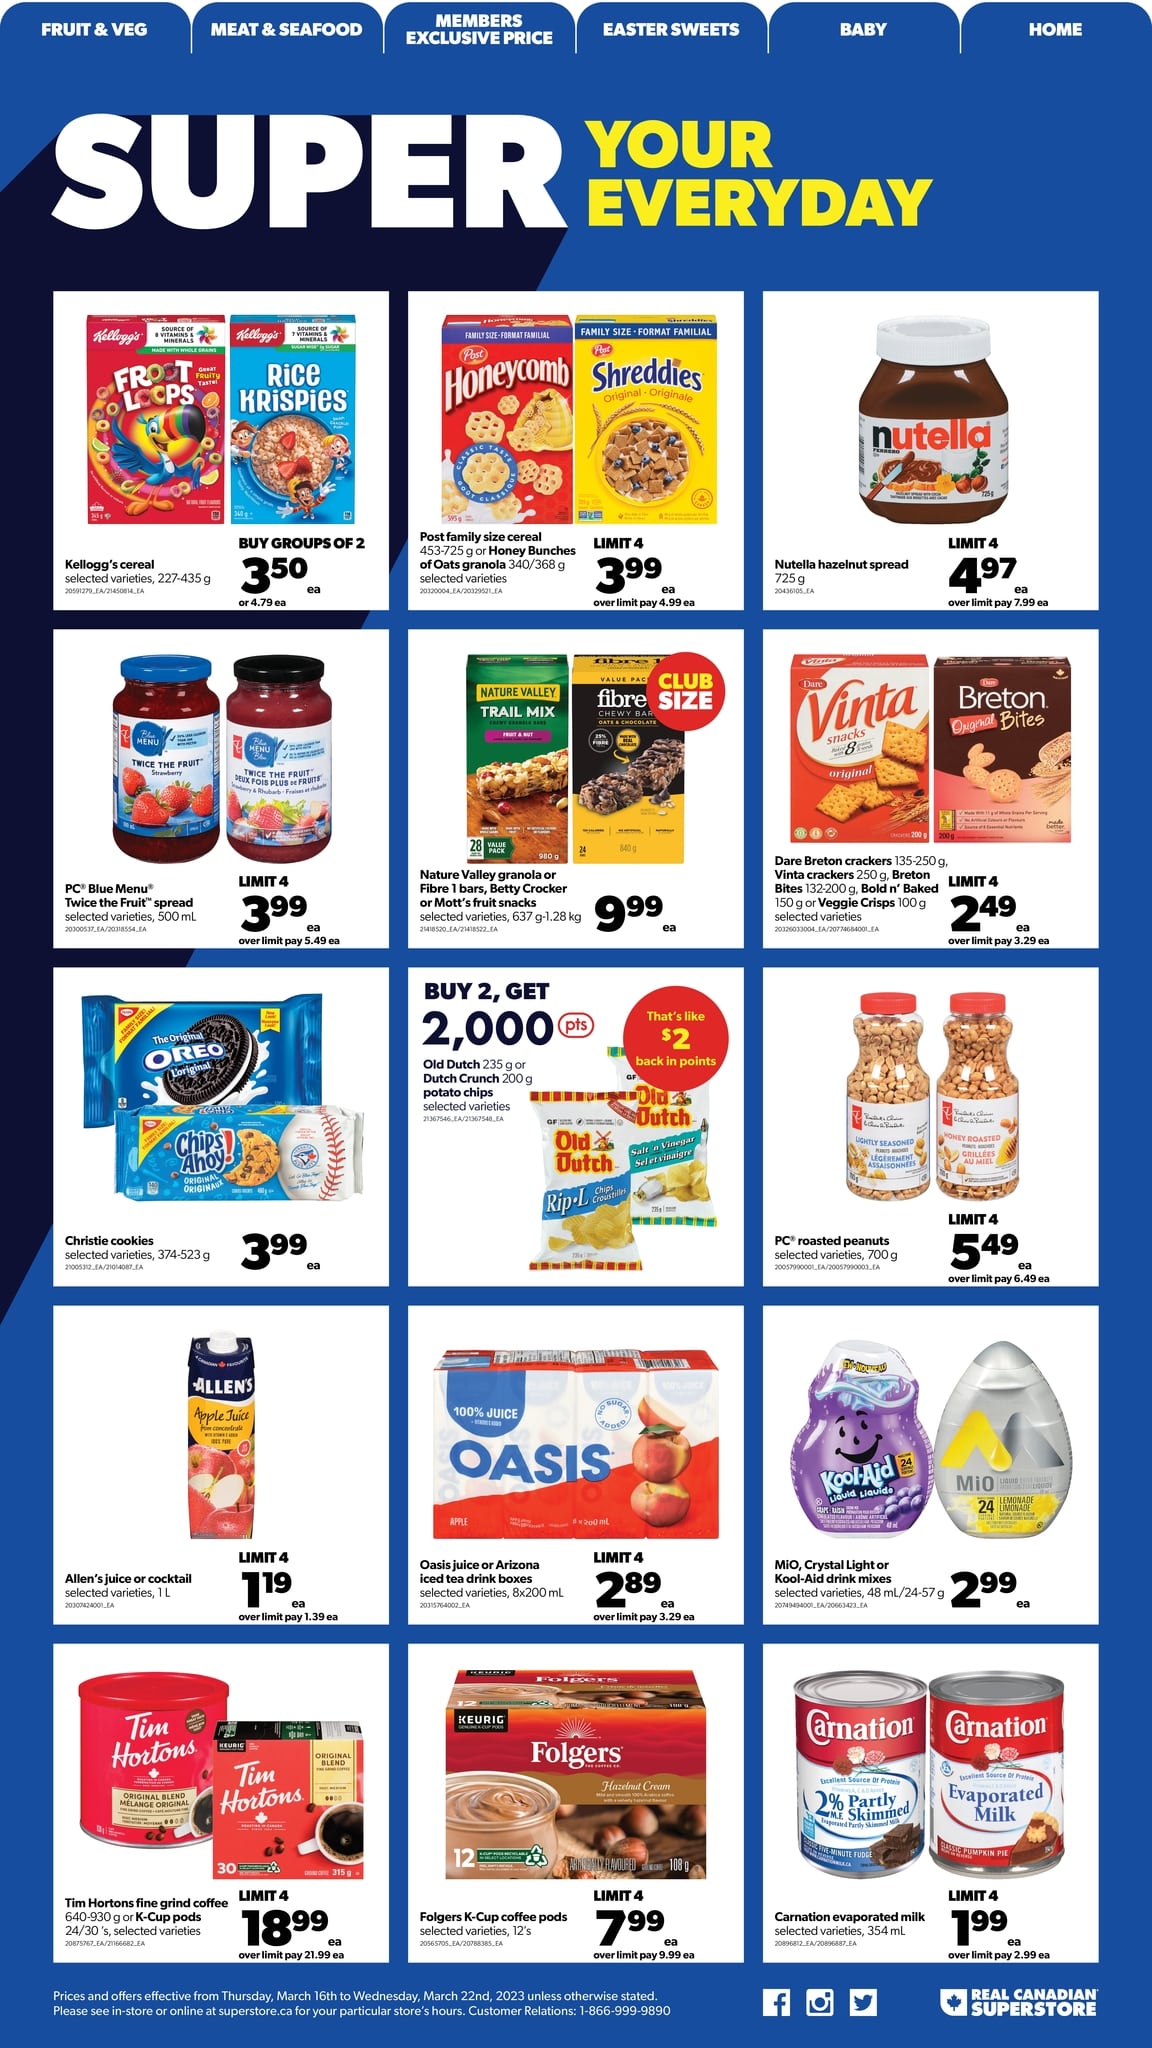 Real Canadian Superstore - Western Canada - Weekly Flyer Specials - Page 12